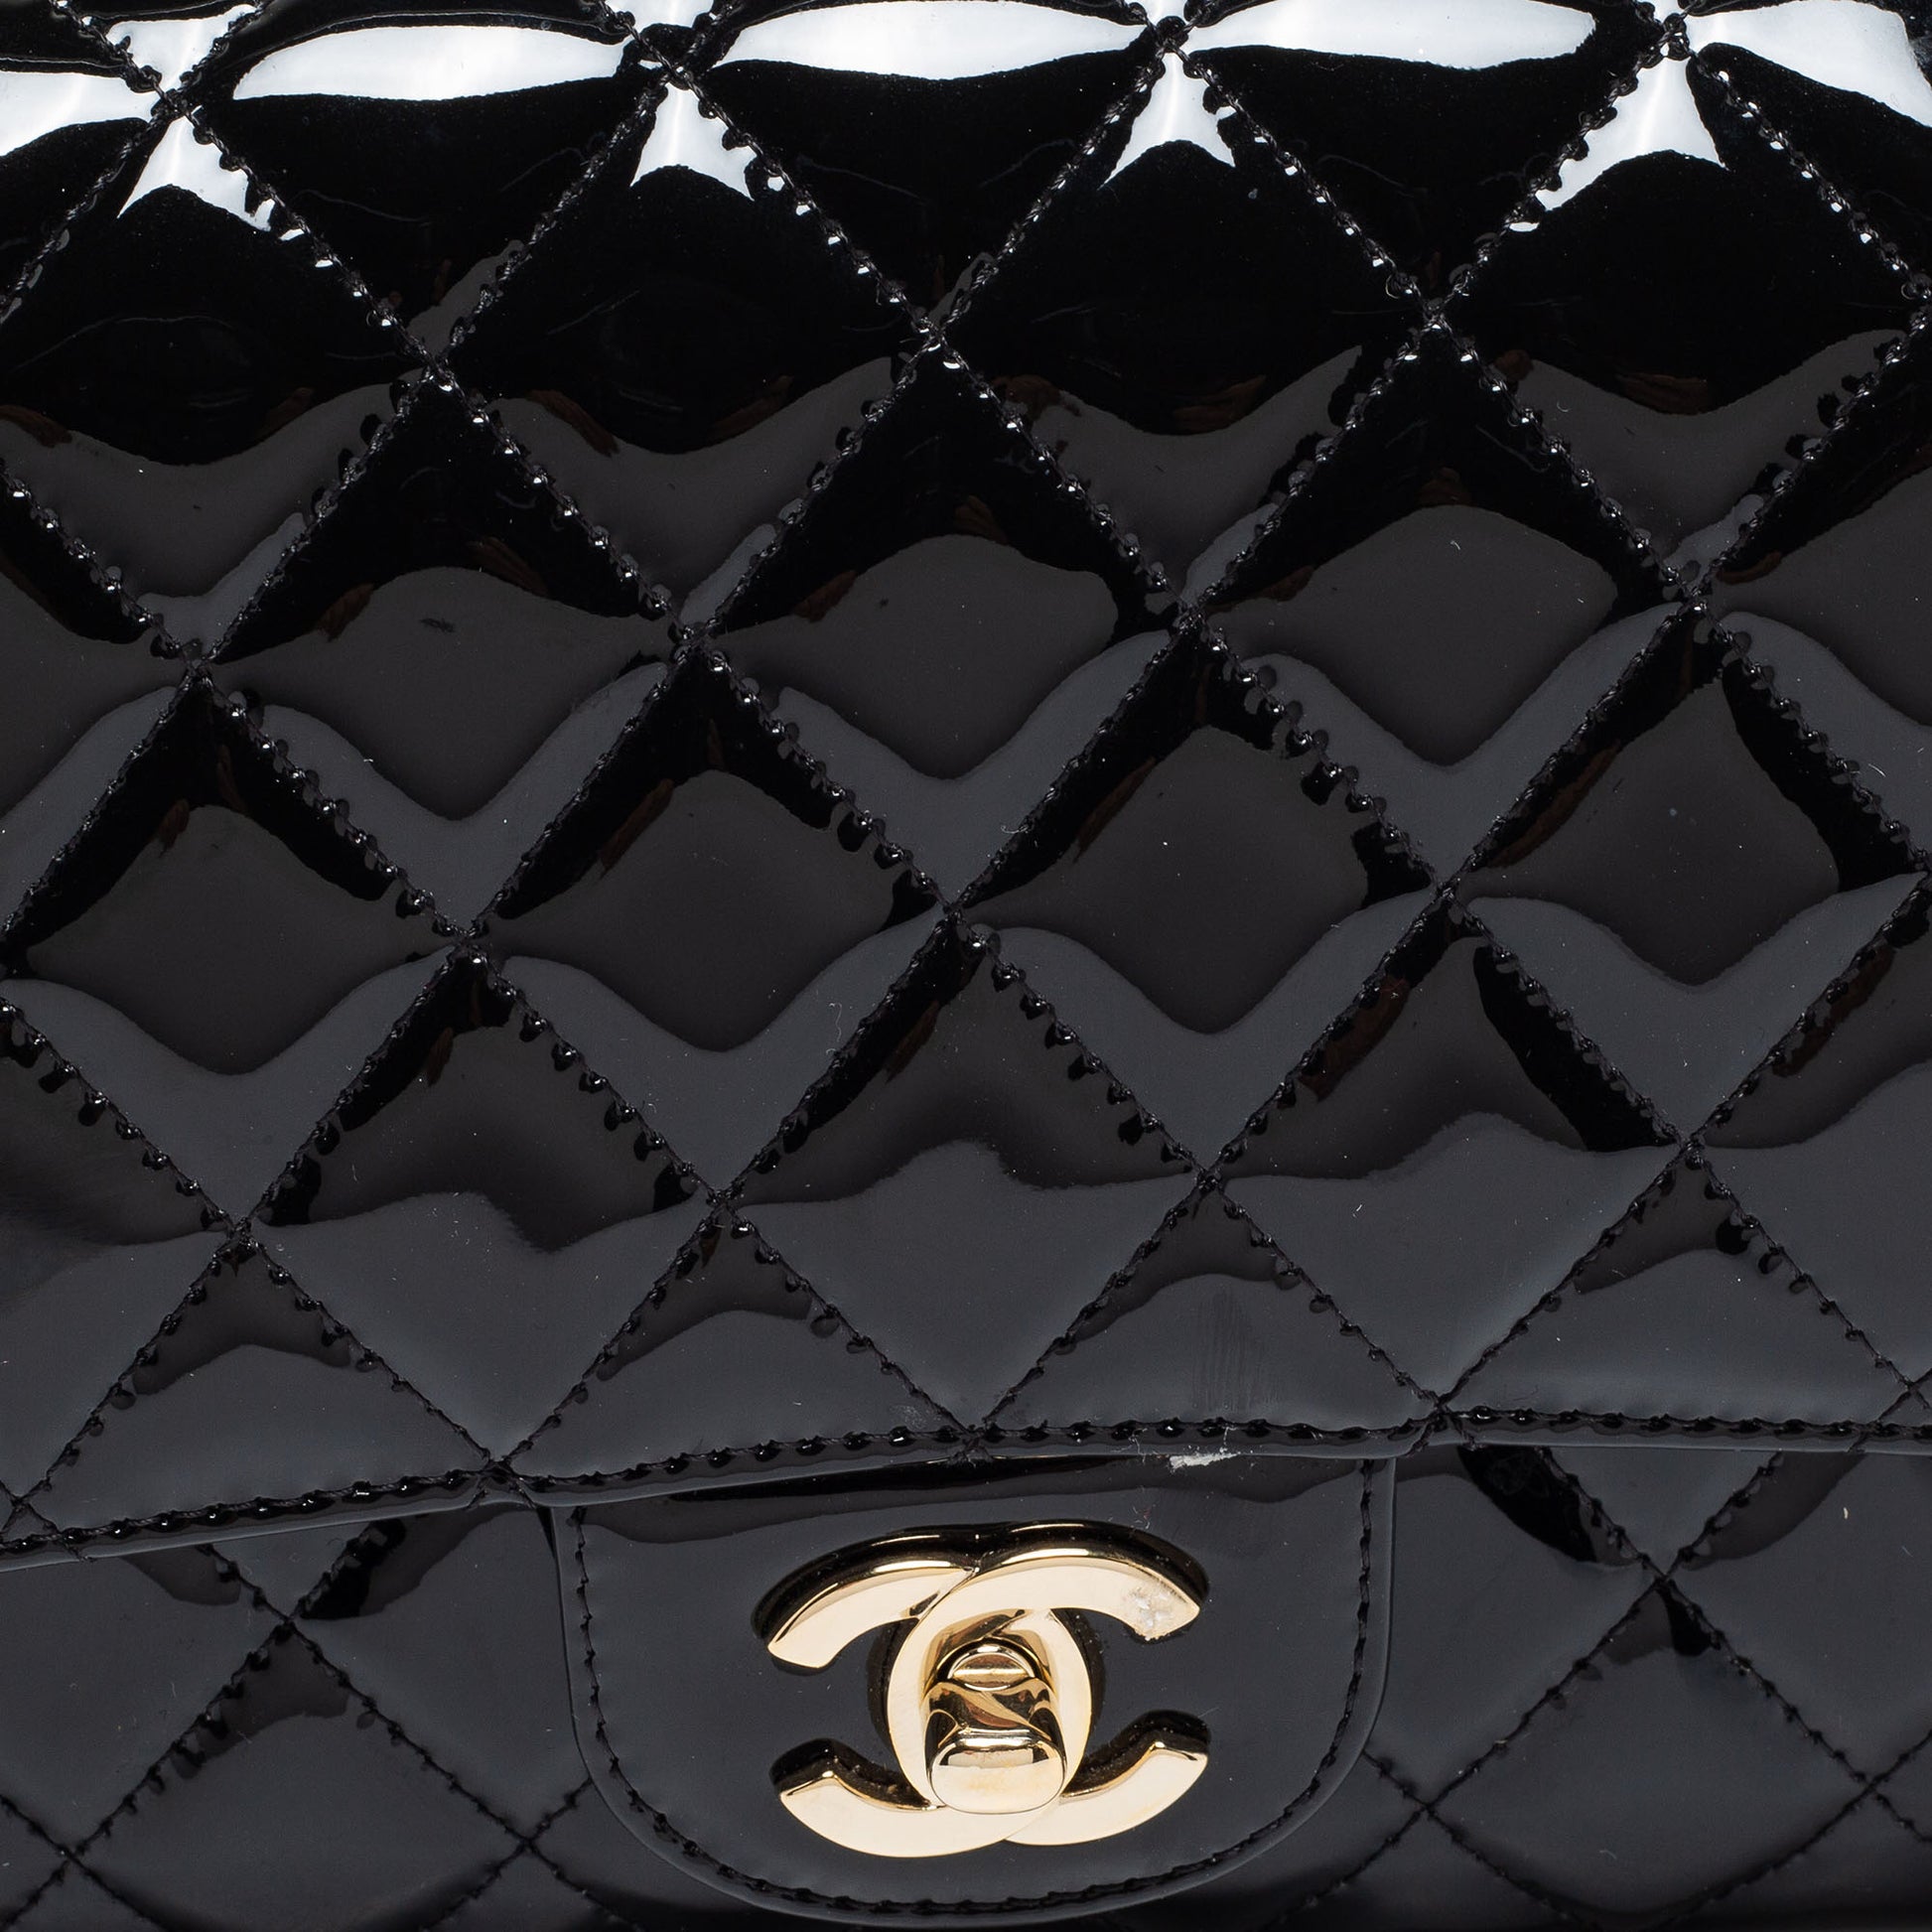 Chanel Black Quilted Patent Leather Medium Classic Double Flap Bag